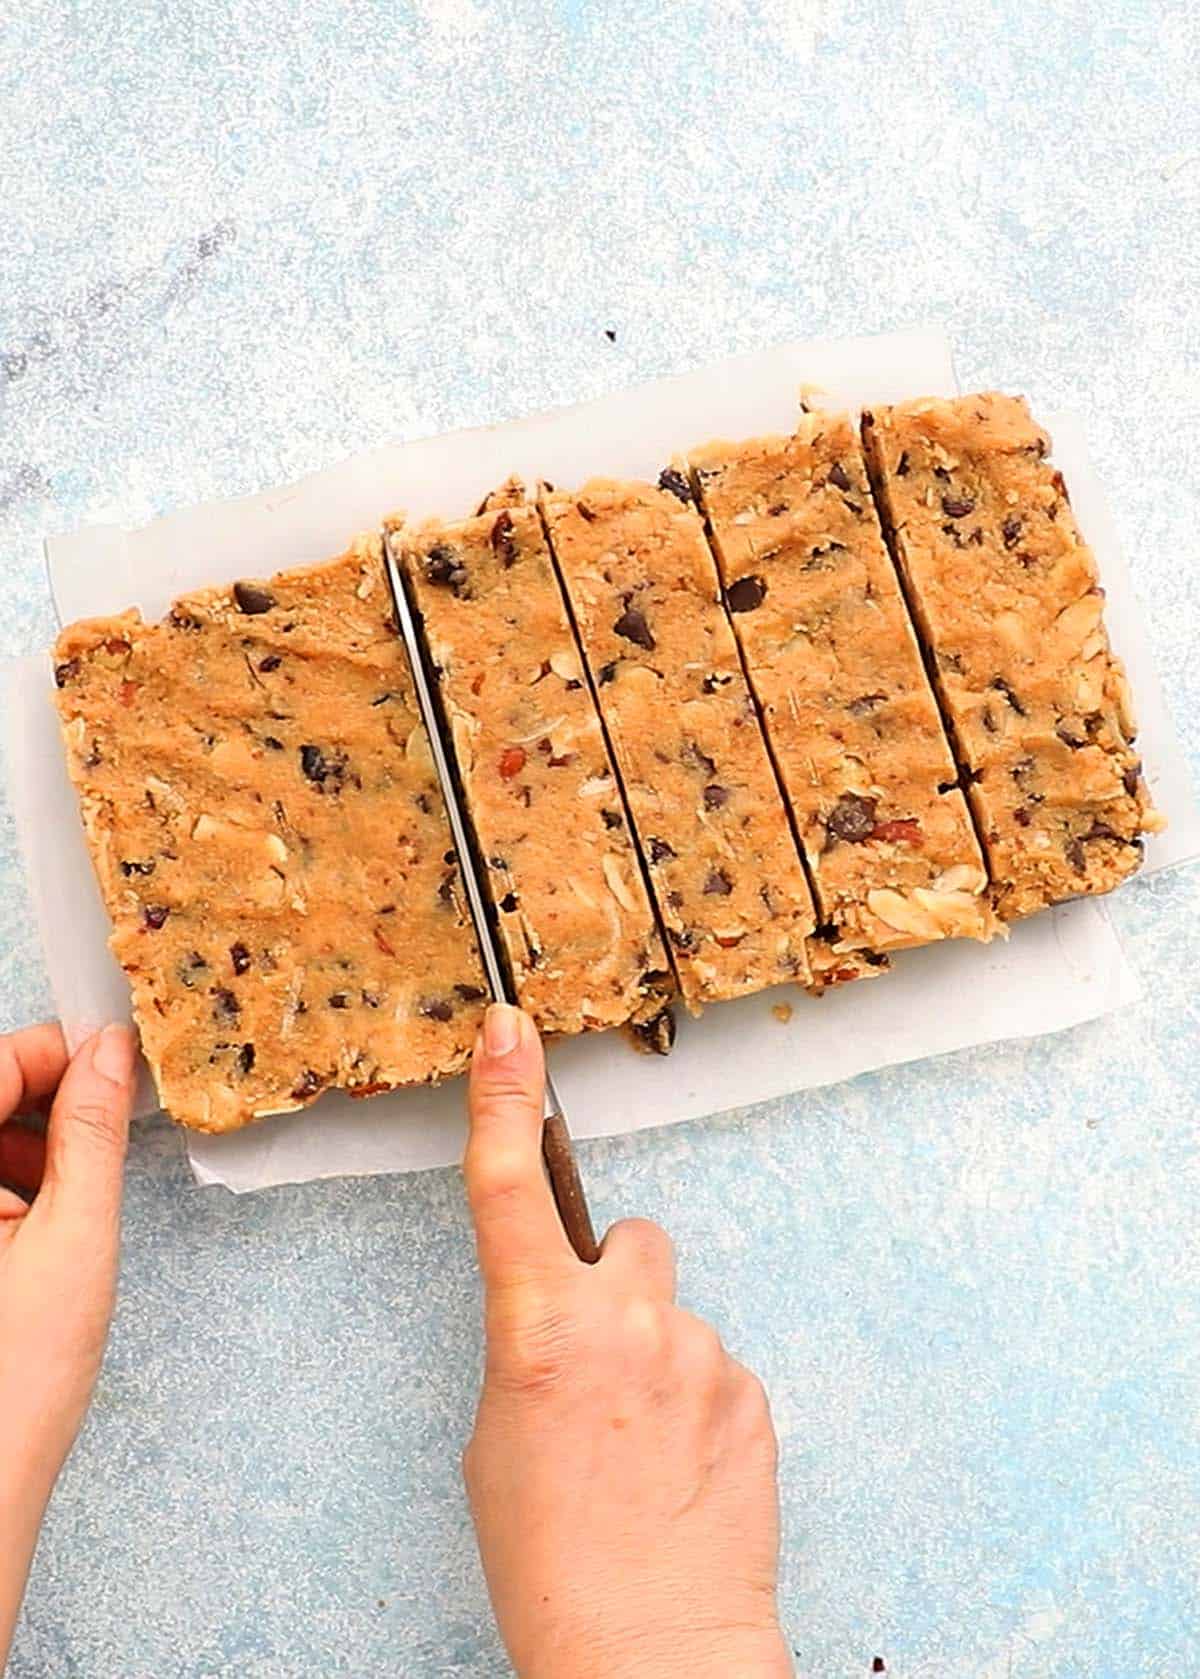 two hands cutting almond bars dough into bars.